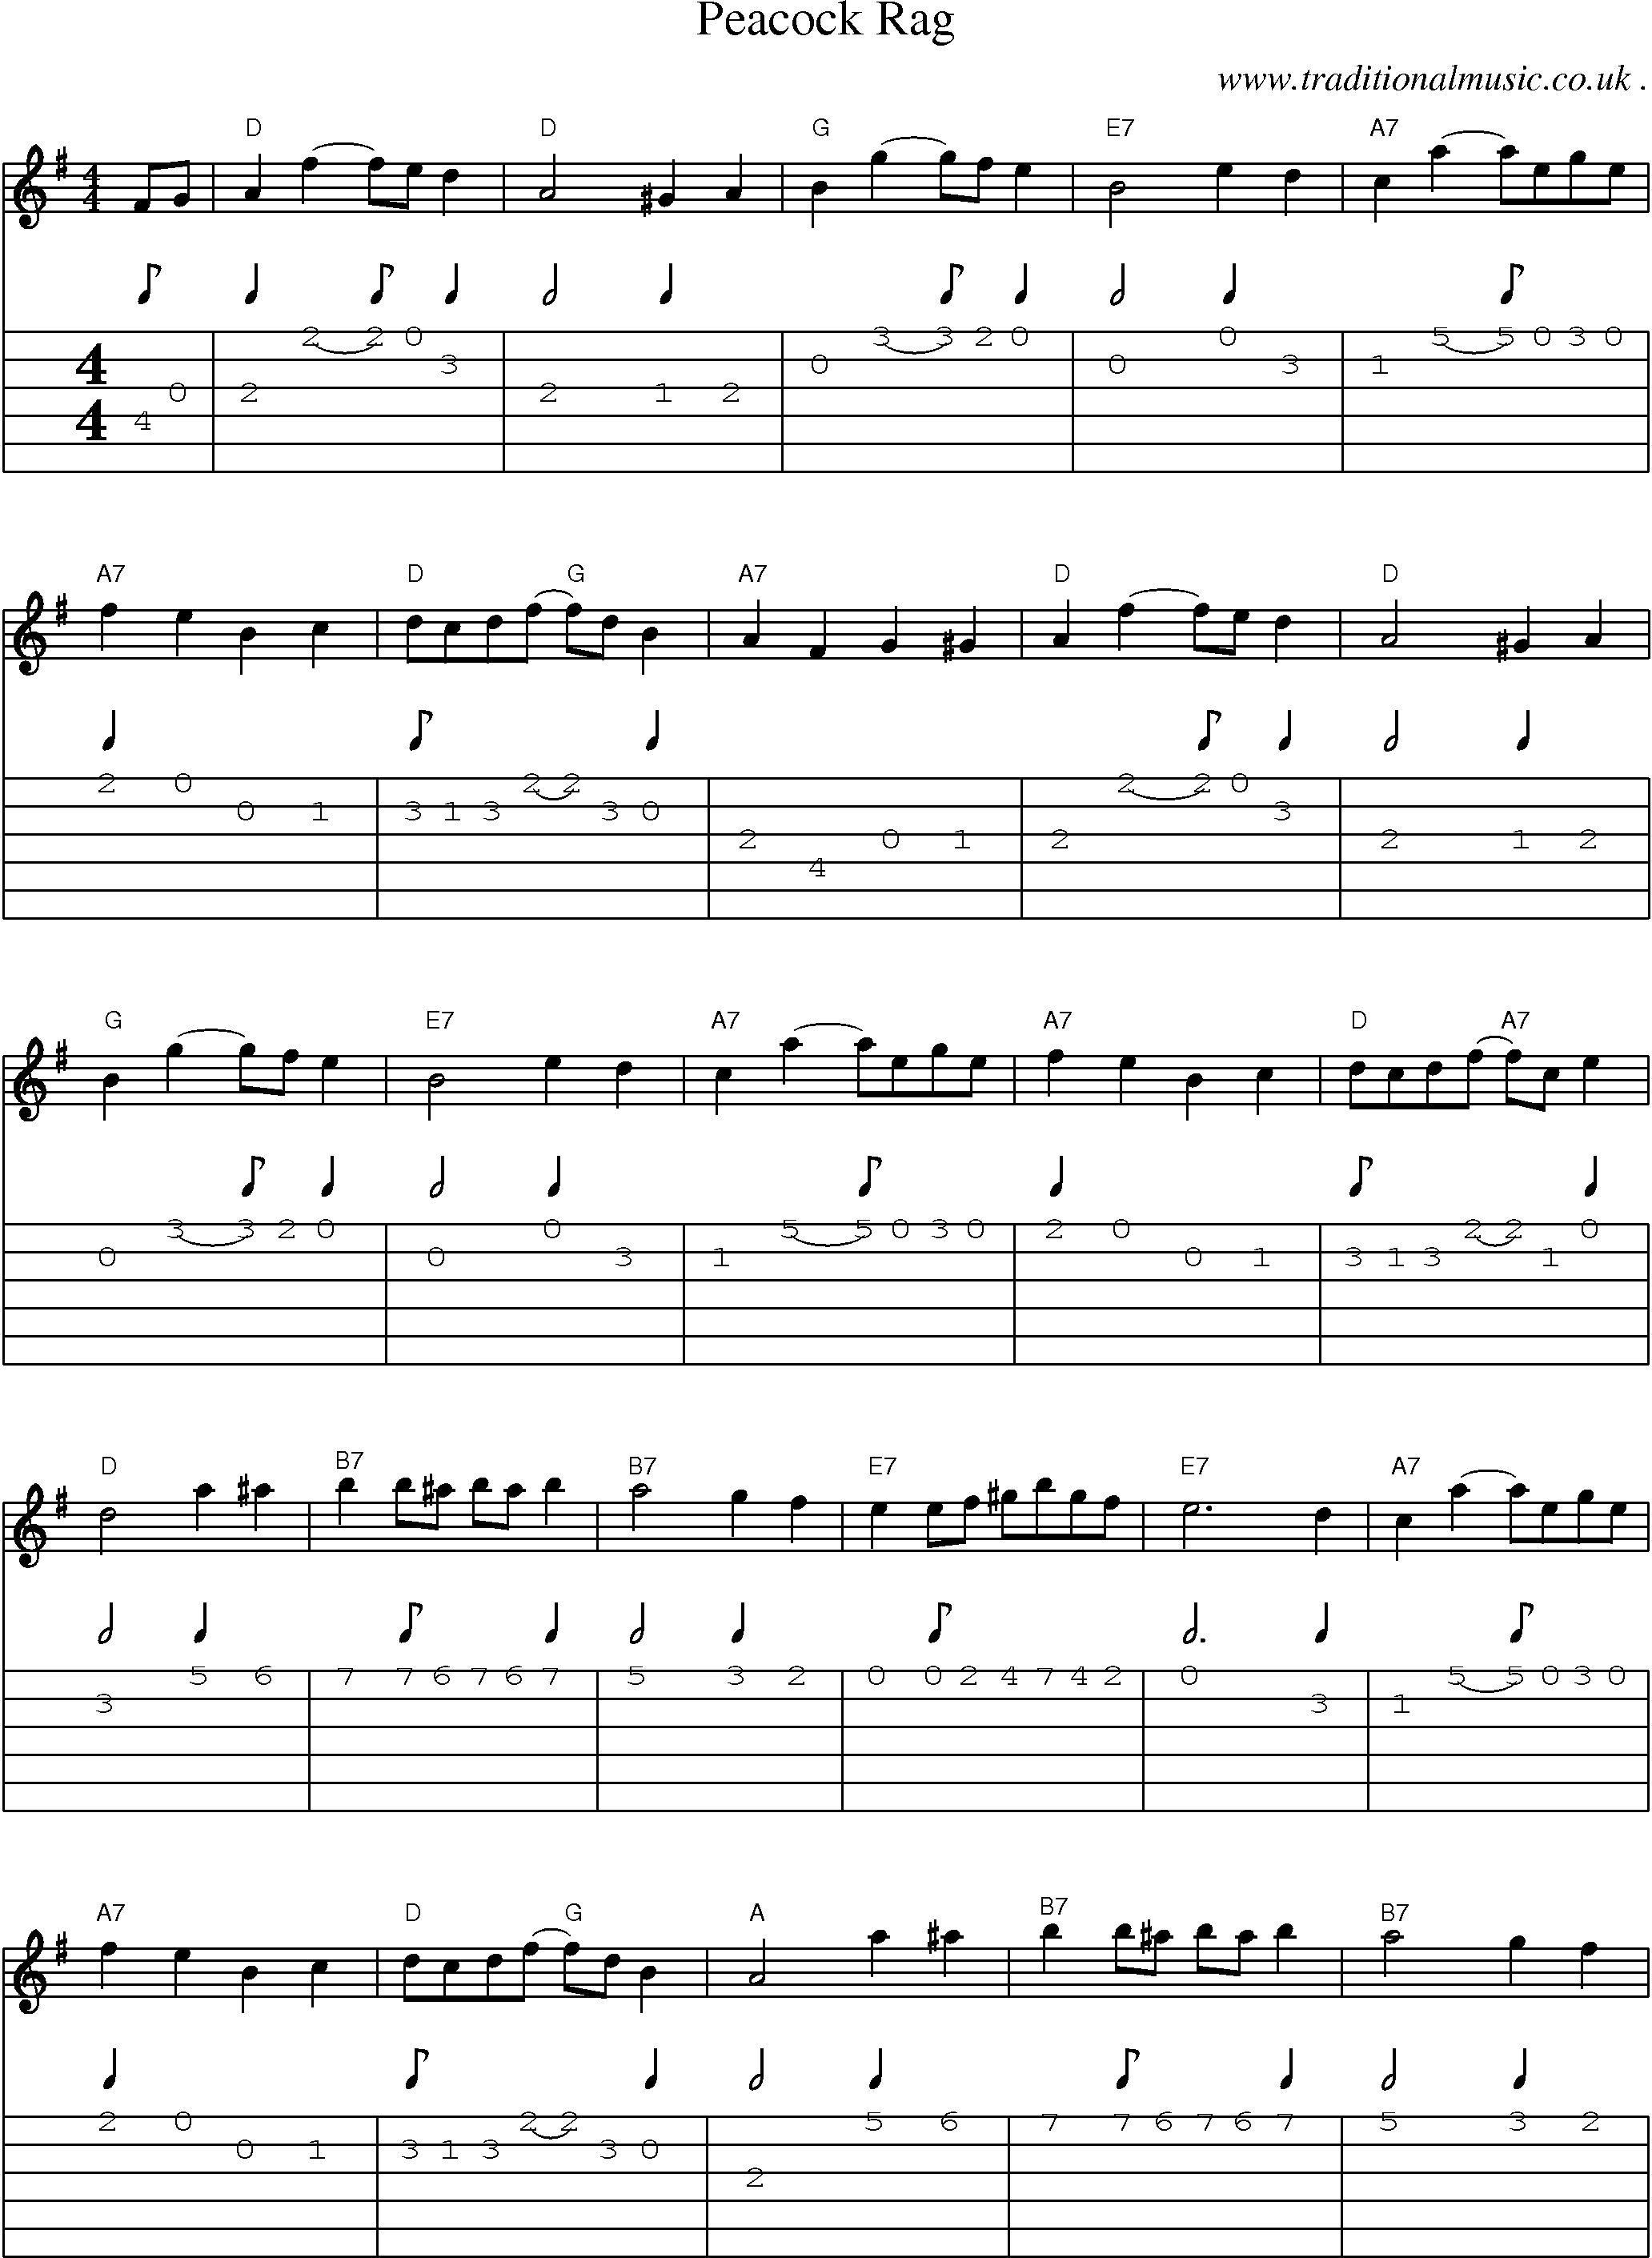 Sheet-Music and Guitar Tabs for Peacock Rag